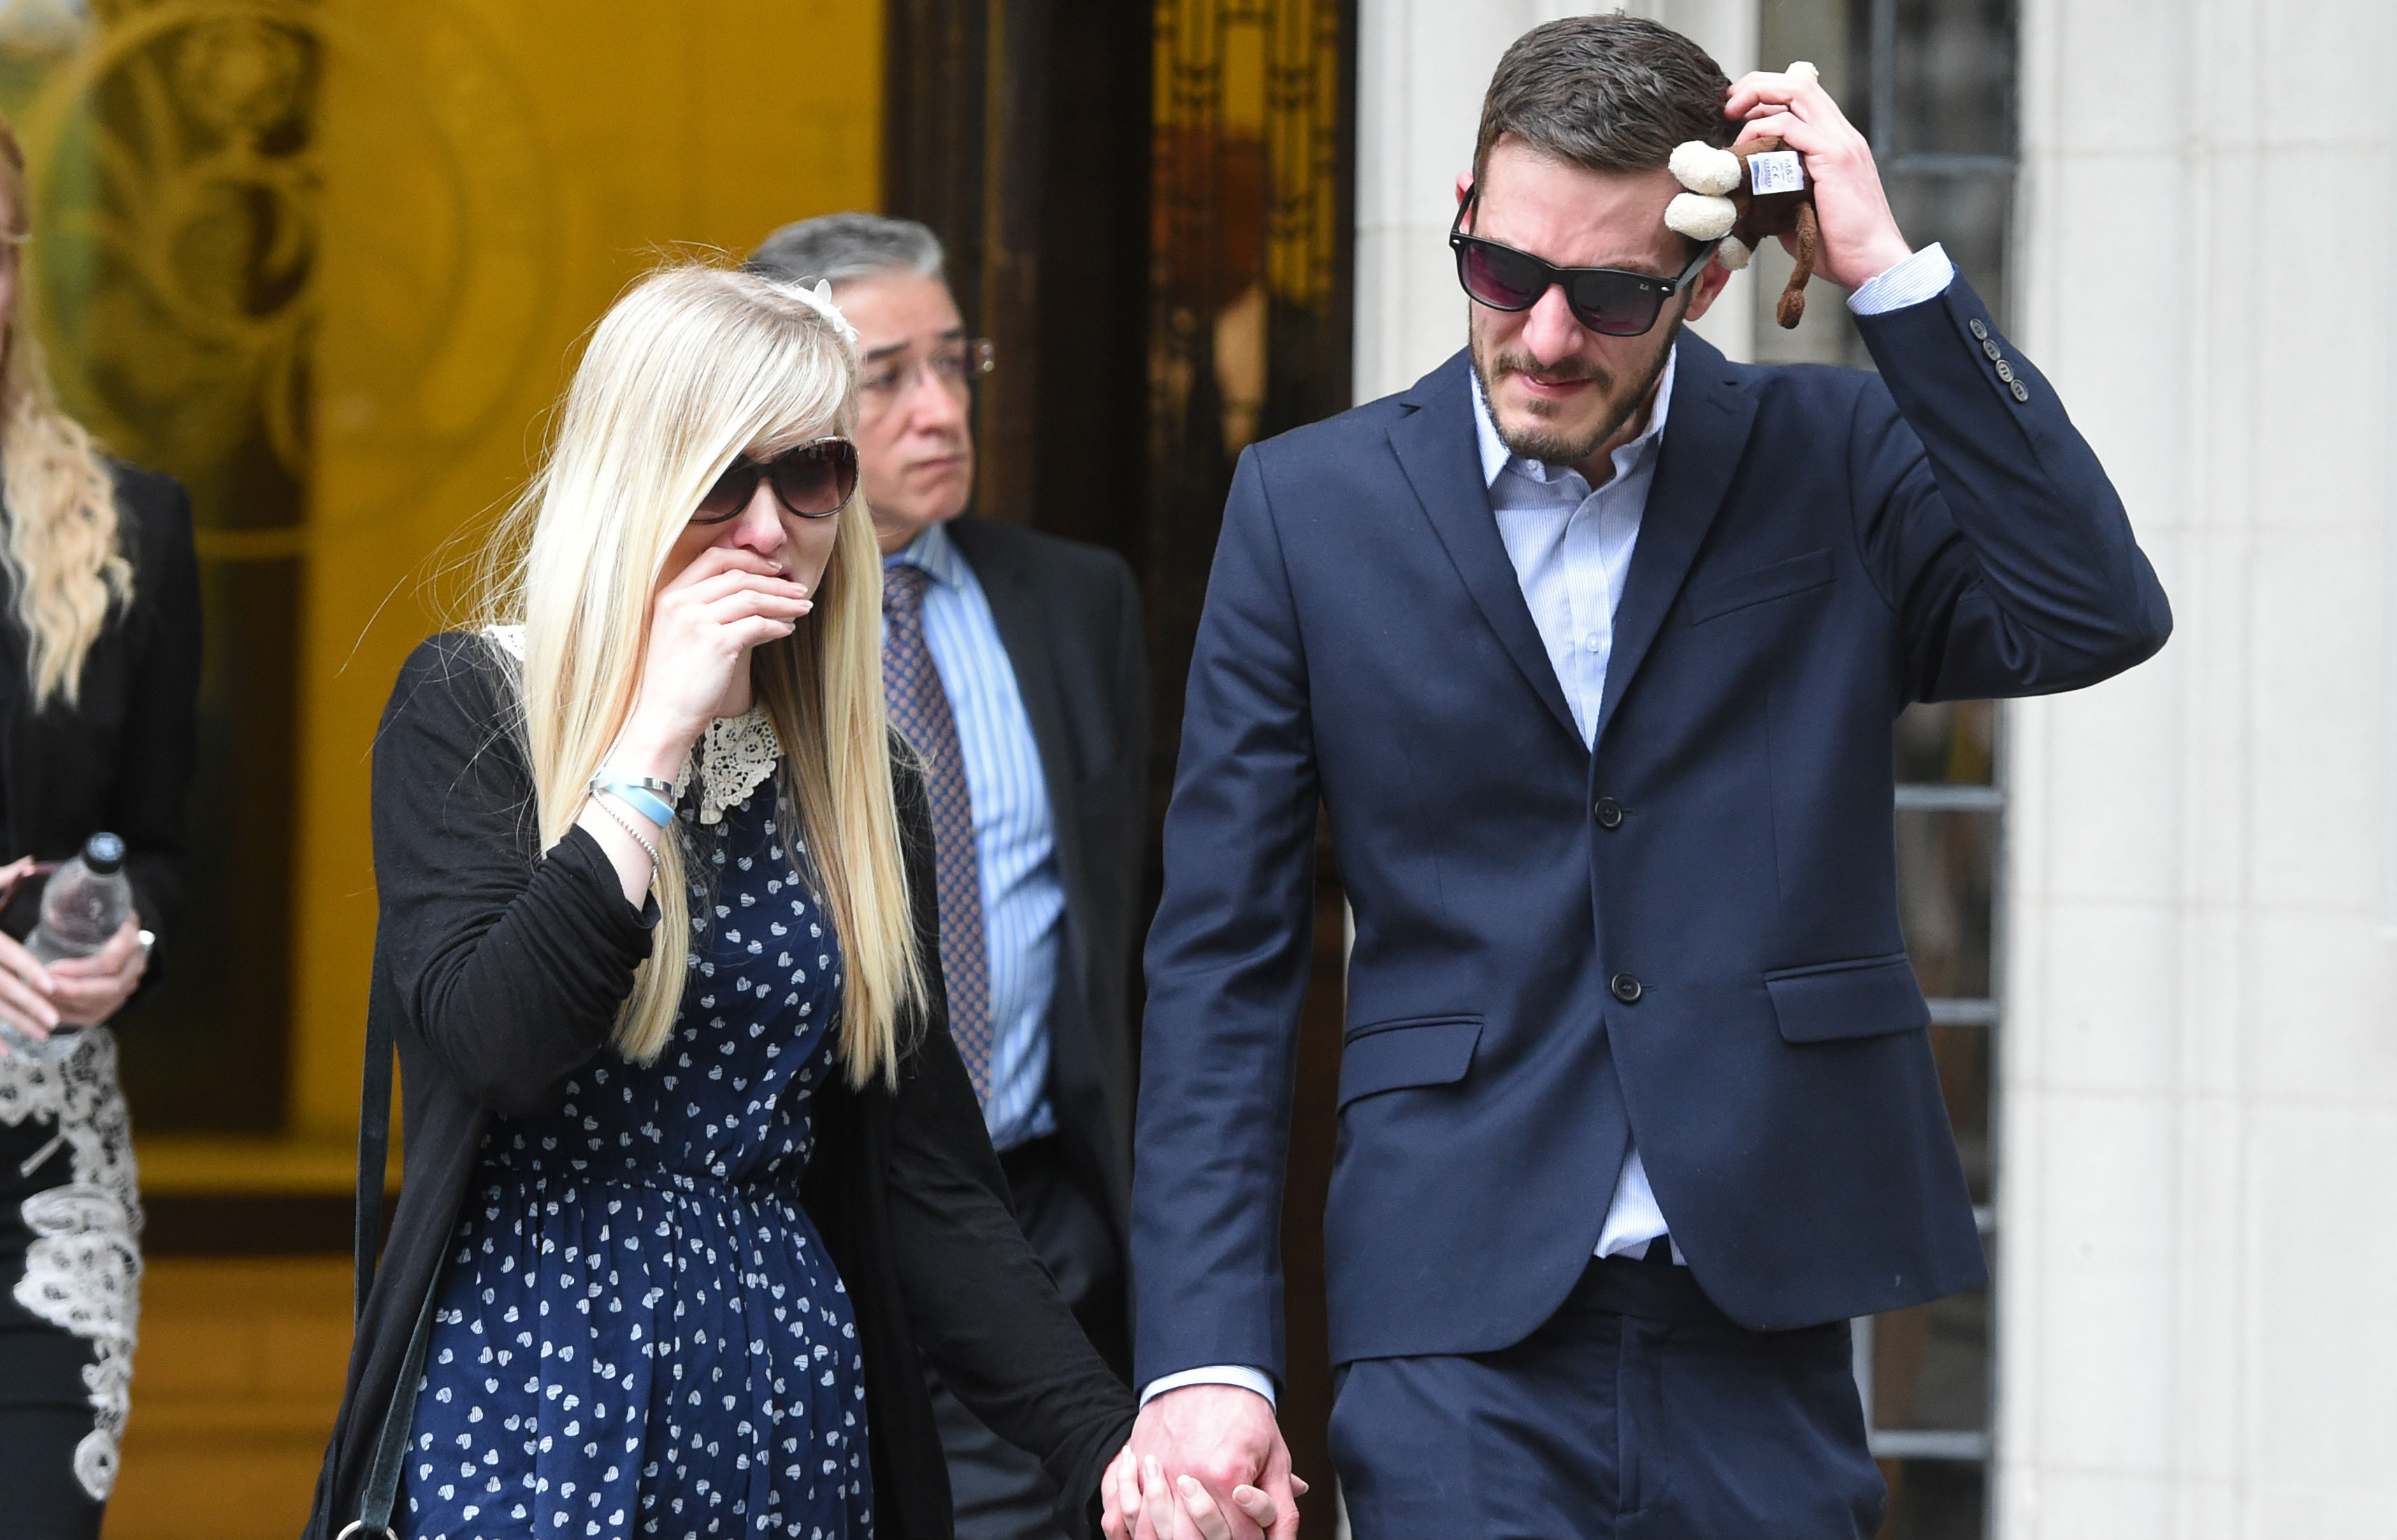  European Court rejects plea from the parents of terminally-ill baby Charlie Gard to intervene in his case